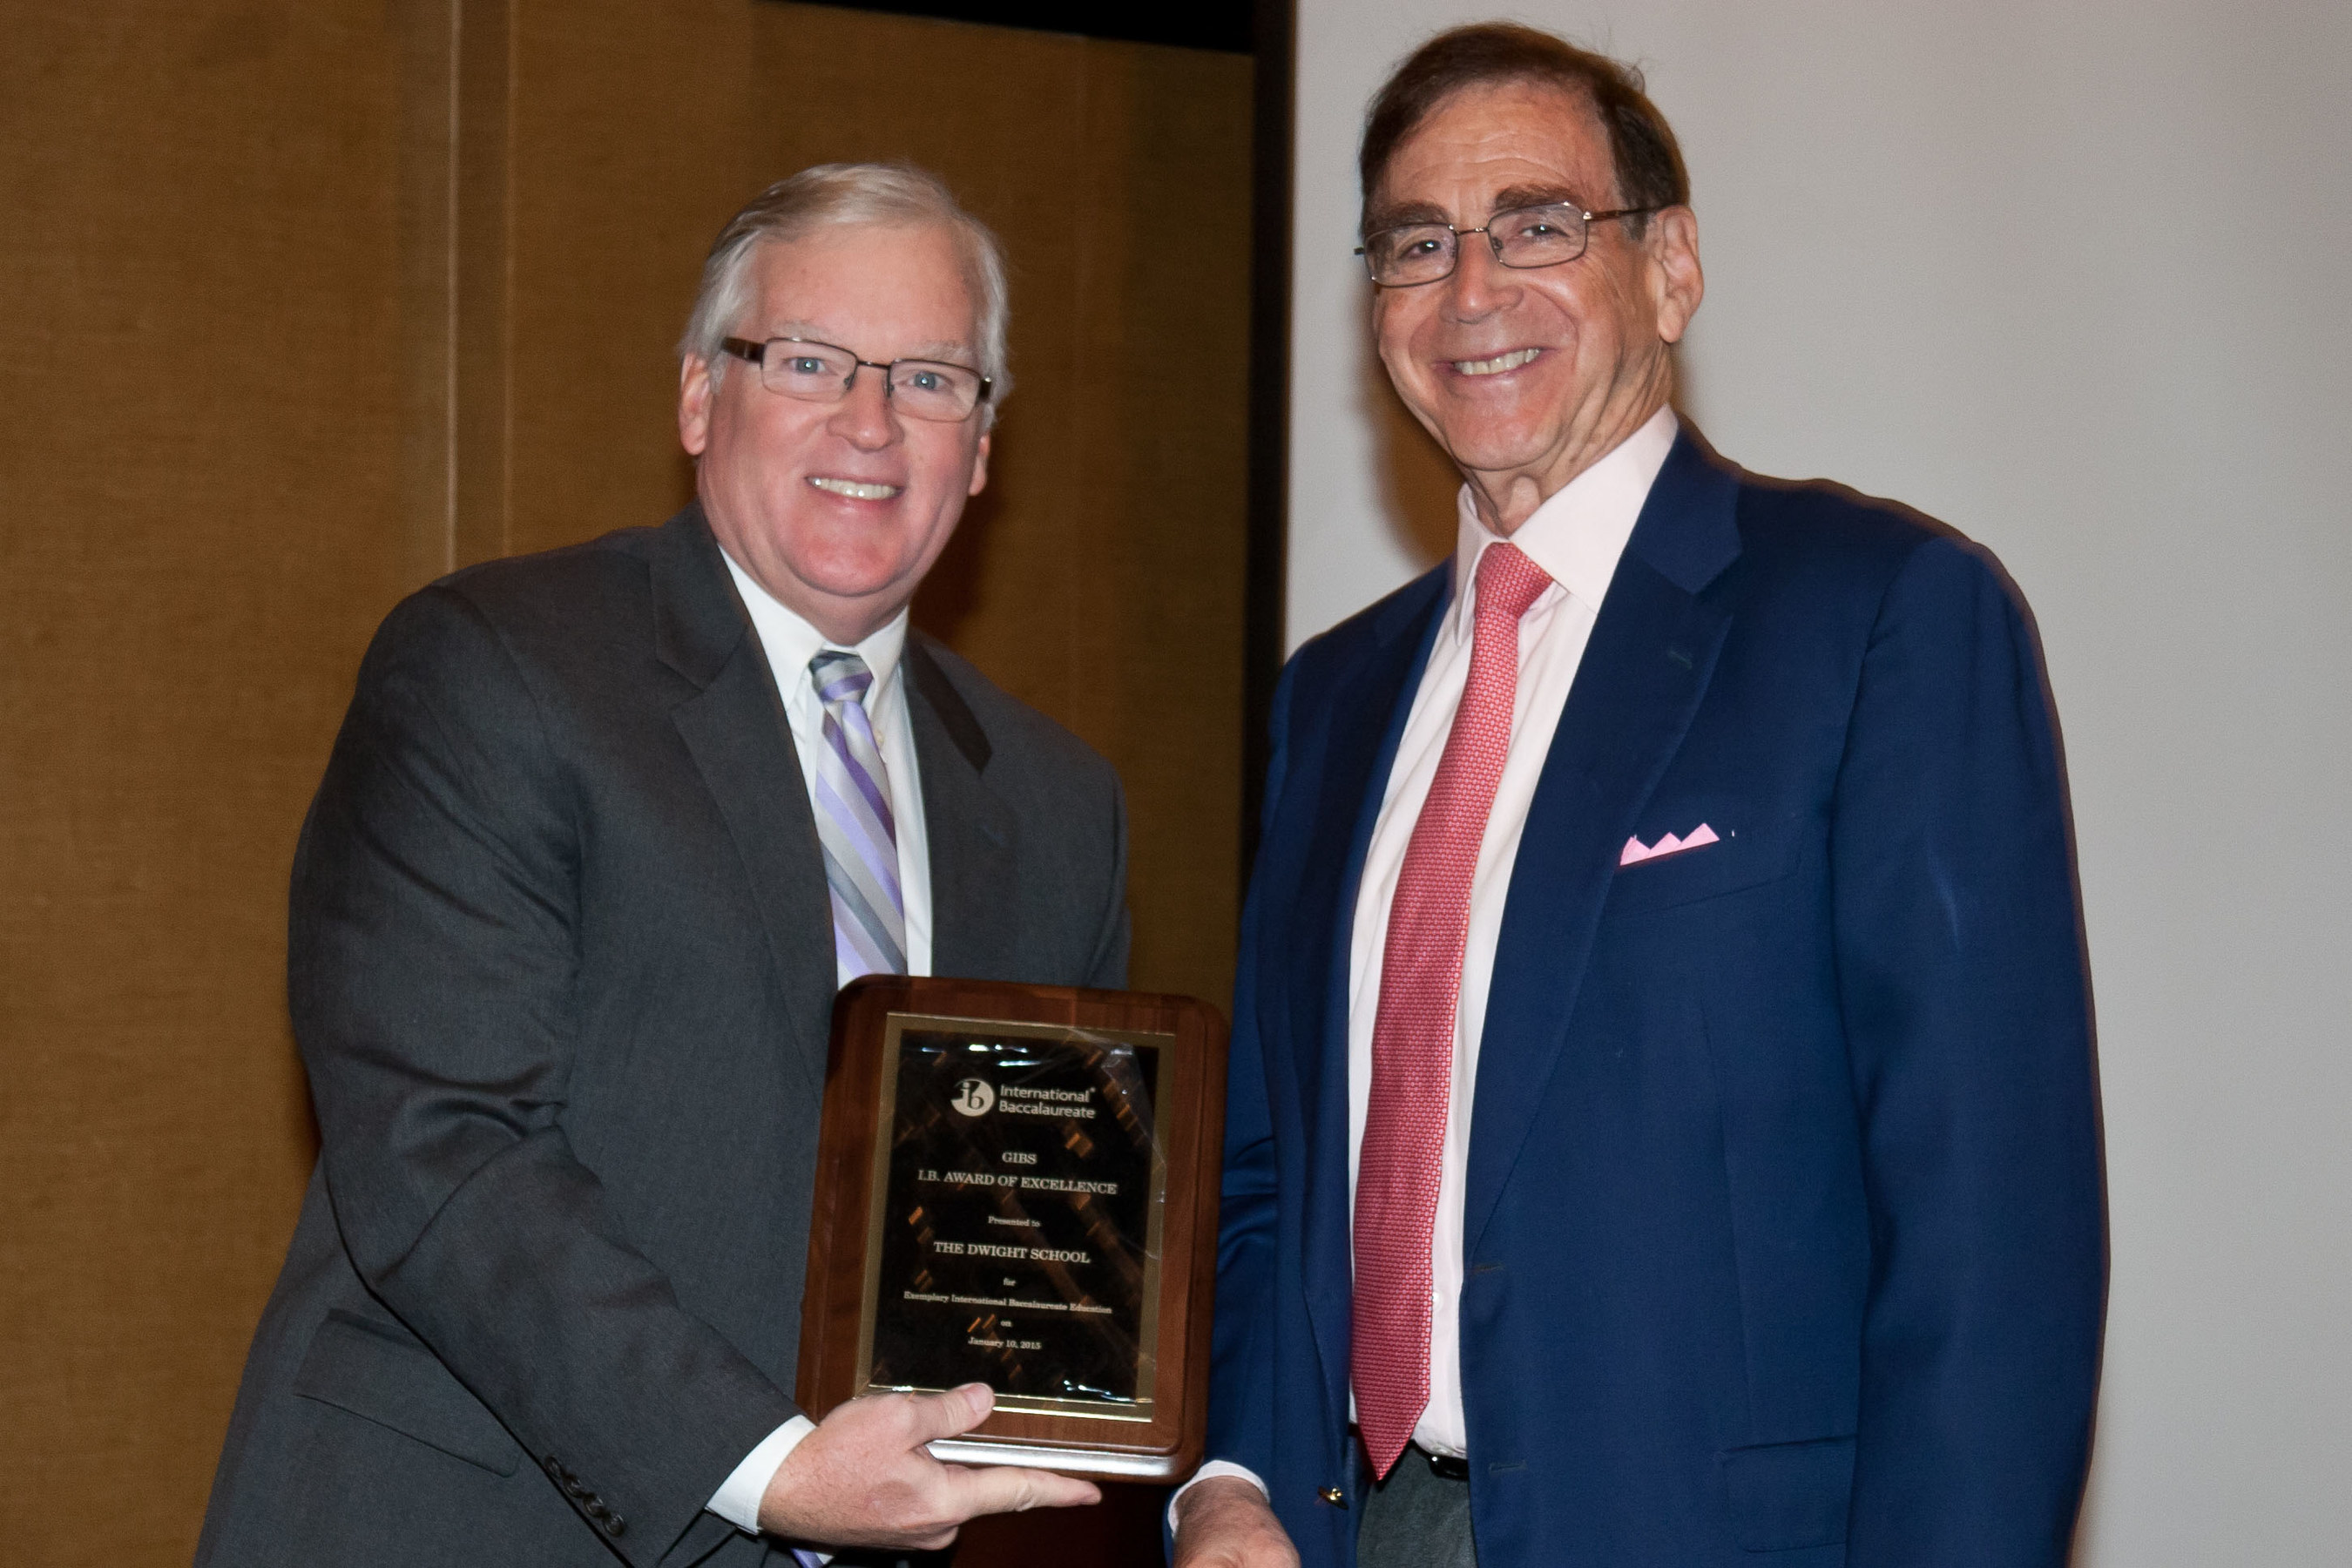 Dwight School Chancellor Stephen Spahn, right, receives a GIBS School of Excellence Award from GIBS President Art Arpin.